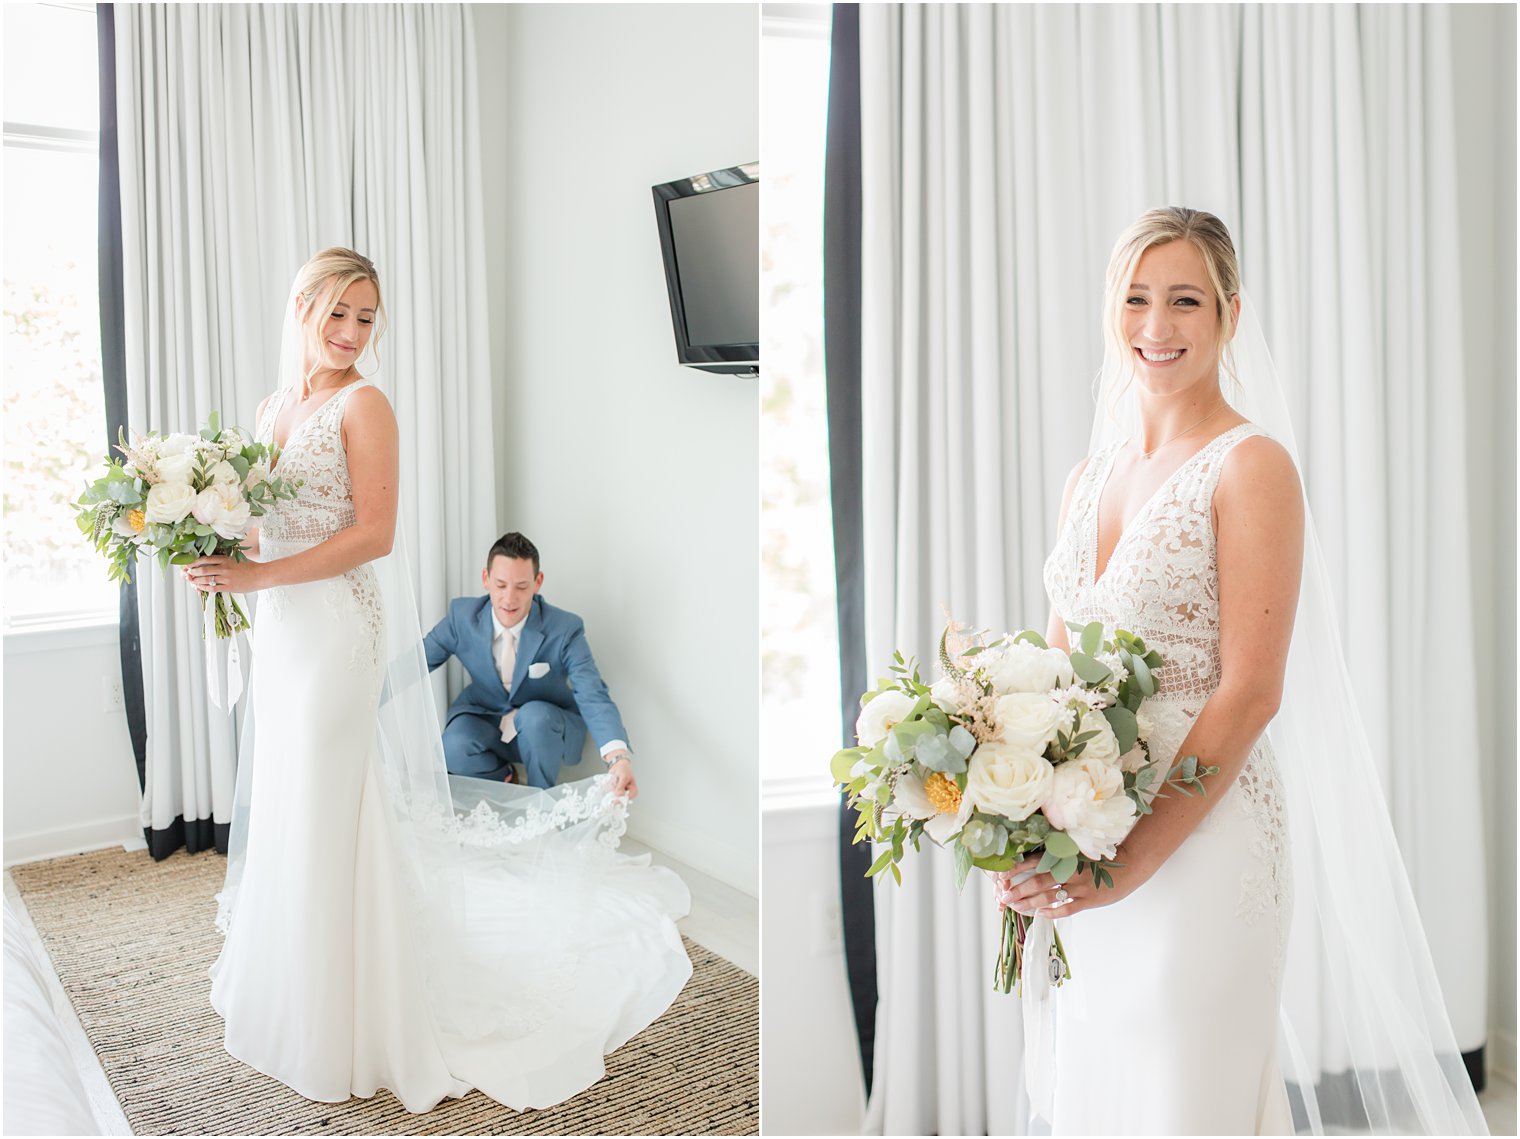 Man of Honor helps bride prepare for Sandy Hook Chapel wedding day with Idalia Photography